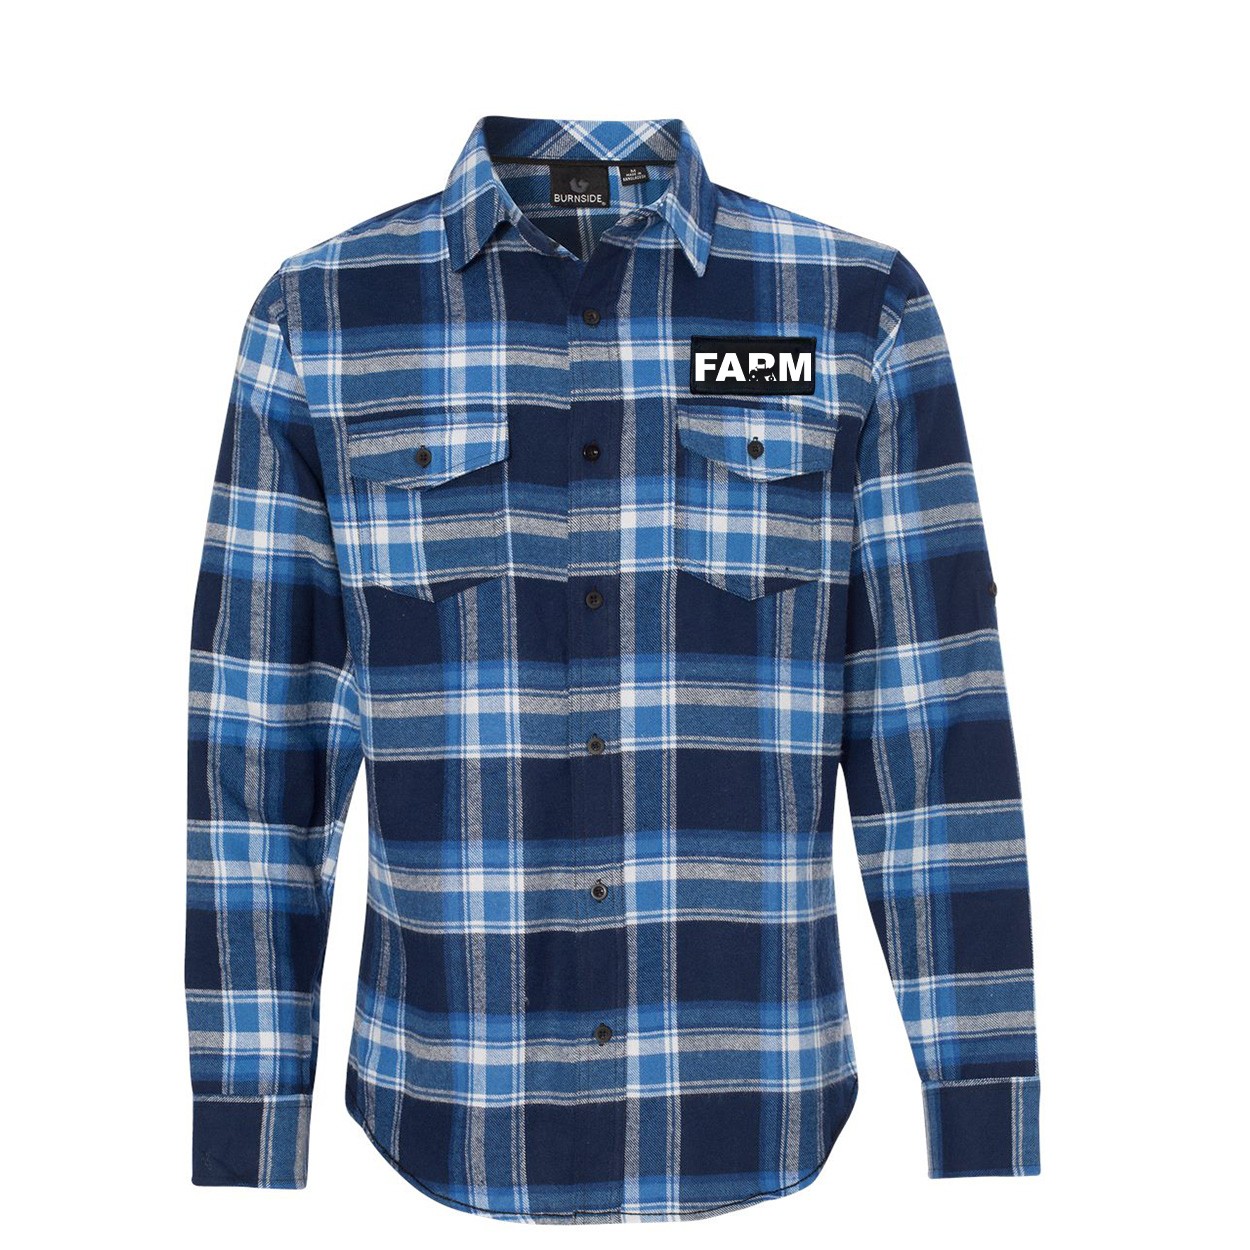 Farm Tractor Logo Classic Unisex Long Sleeve Woven Patch Flannel Shirt Blue/White (White Logo)